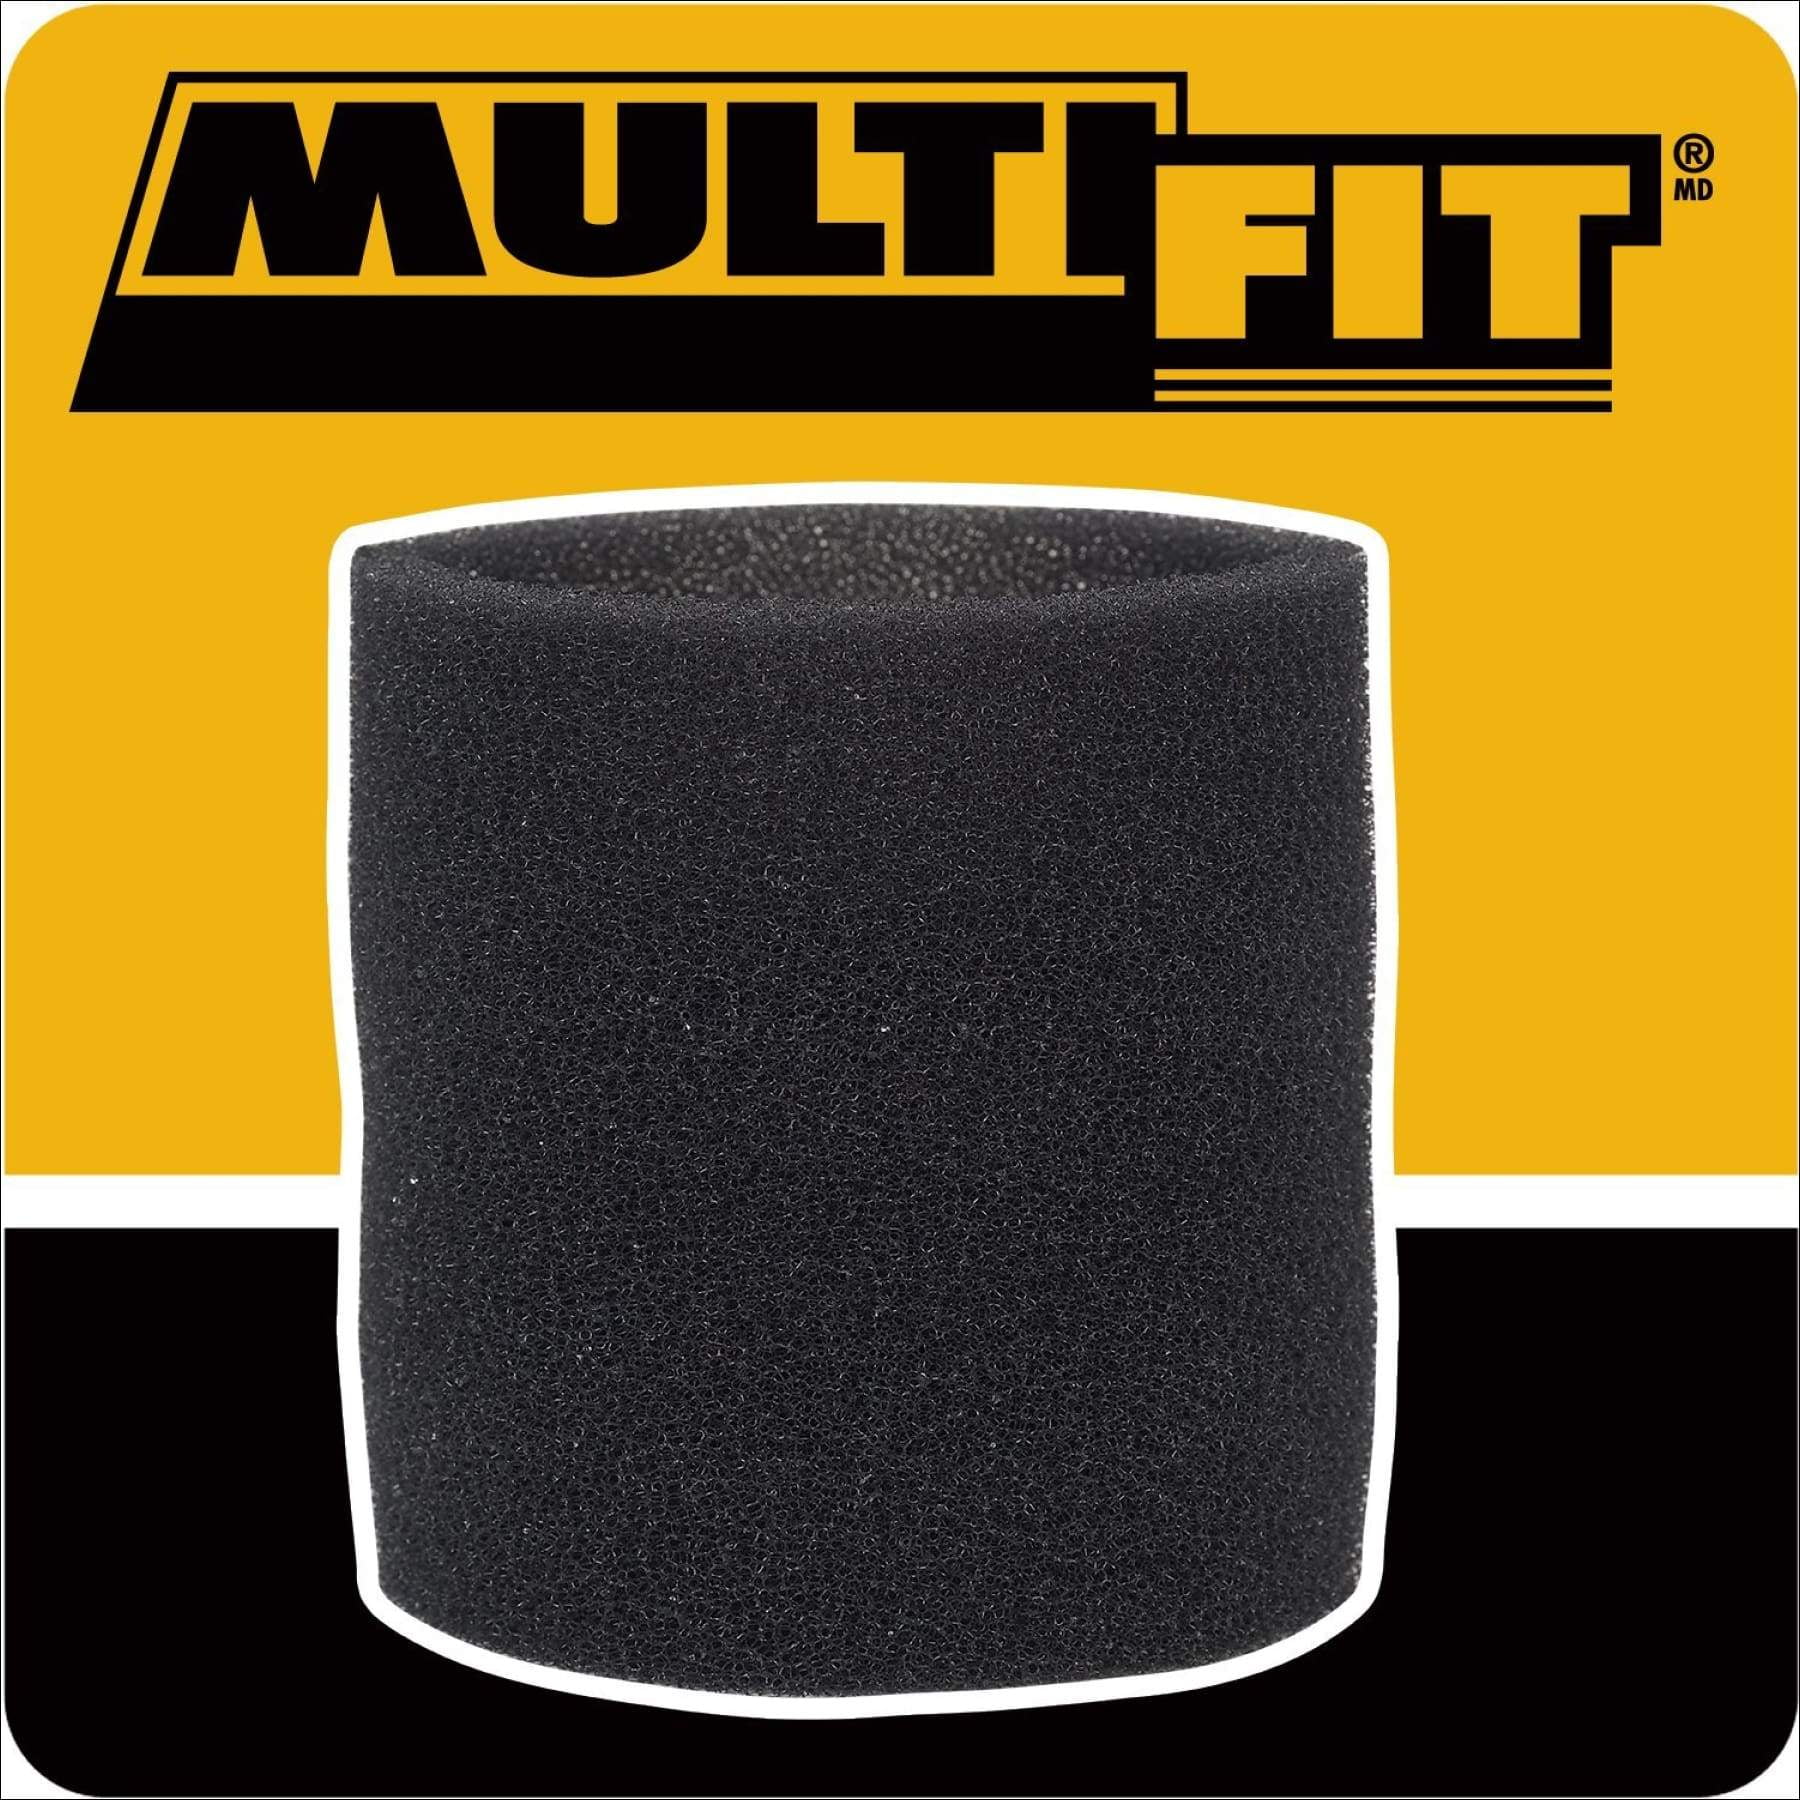 6 Foam filters for Genie,Shop-Vac,VacMaster 5 gallon and larger wet/dry workshop 